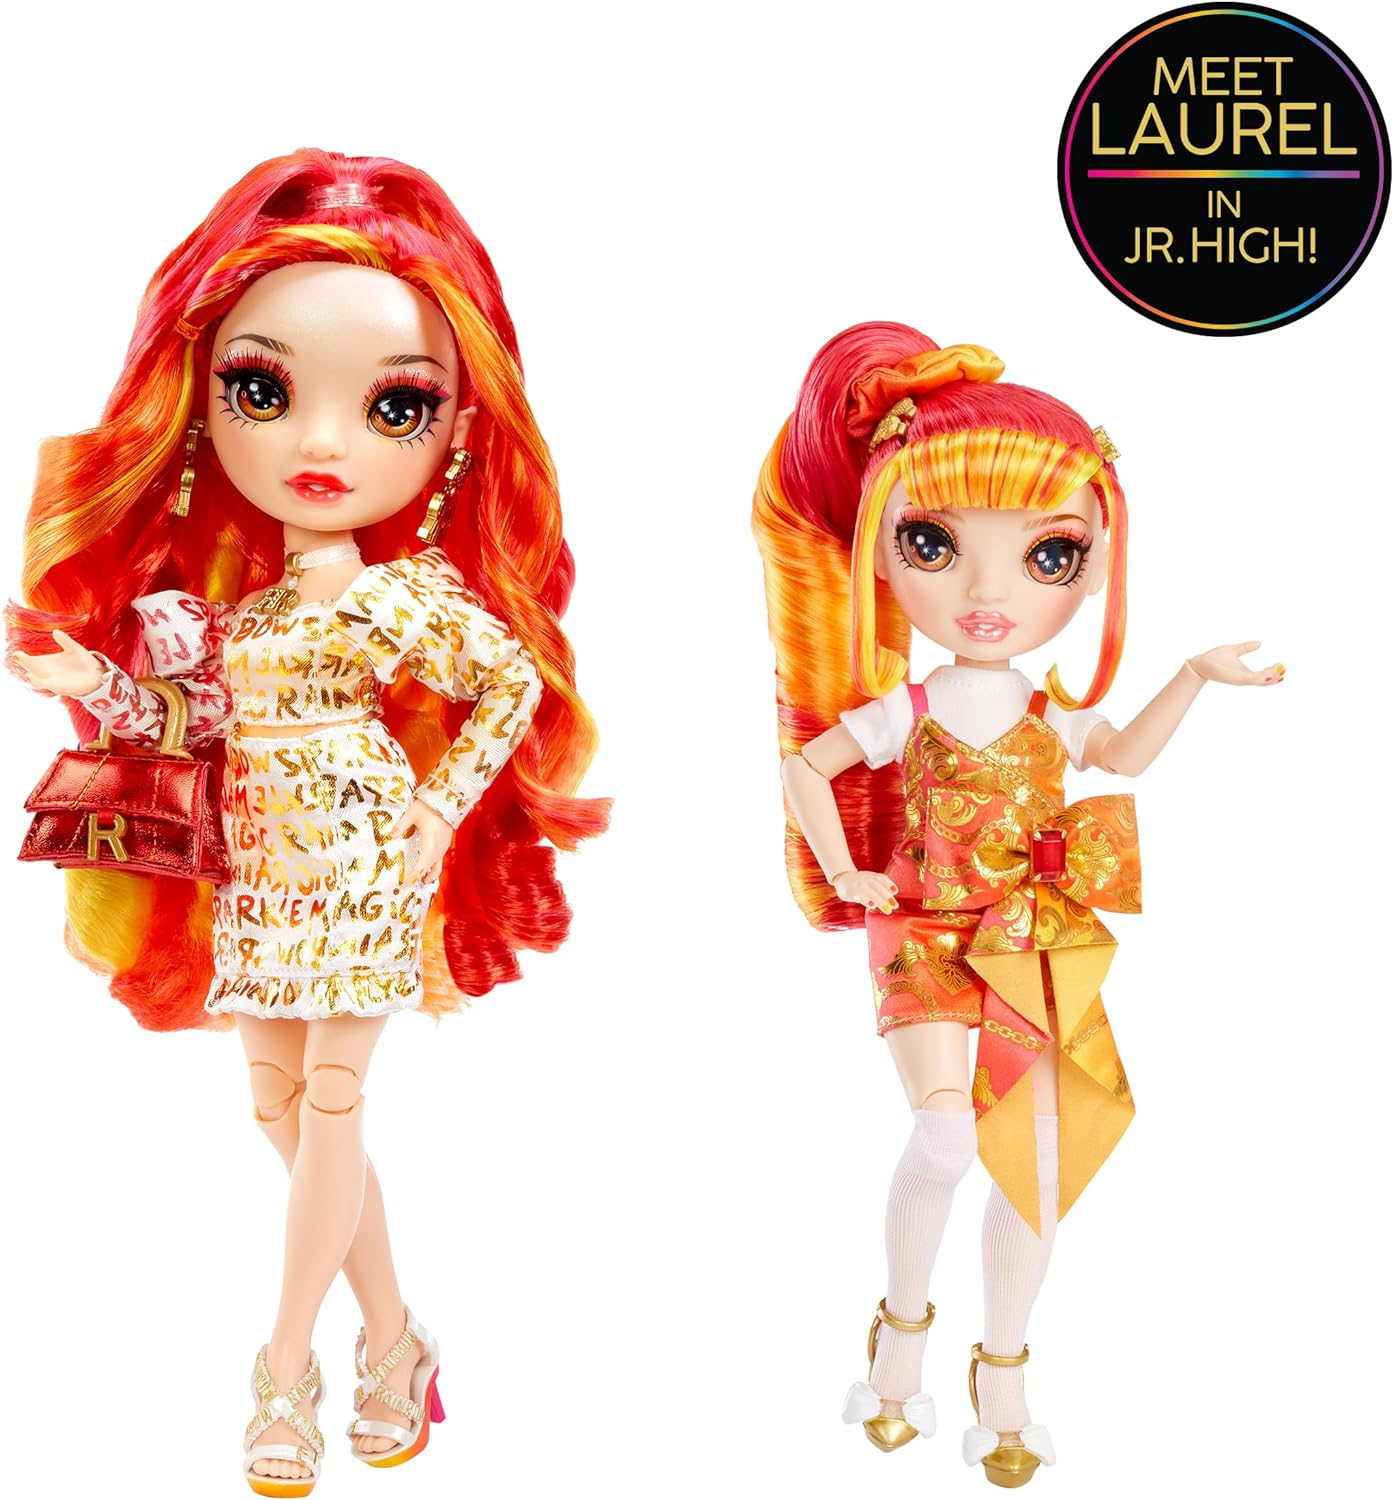 My toys,loves and fashions: Ever After High - Bonecas juntas!!!